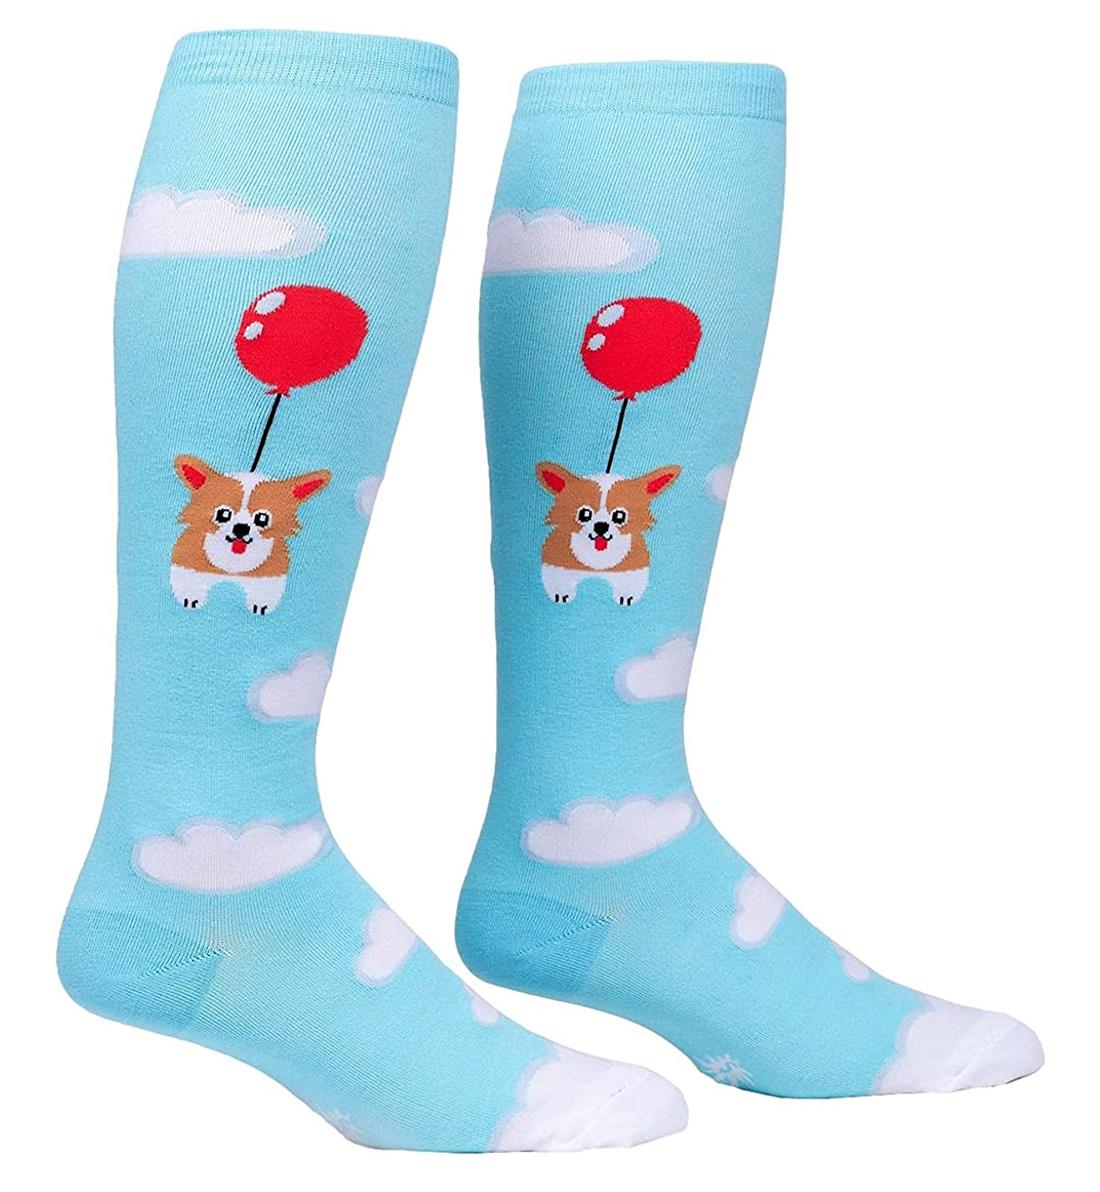 SOCK it to me Unisex Stretch-It Knee High Socks (S0130),Pup, Pup and Away - Pup Pup and Away,One Size